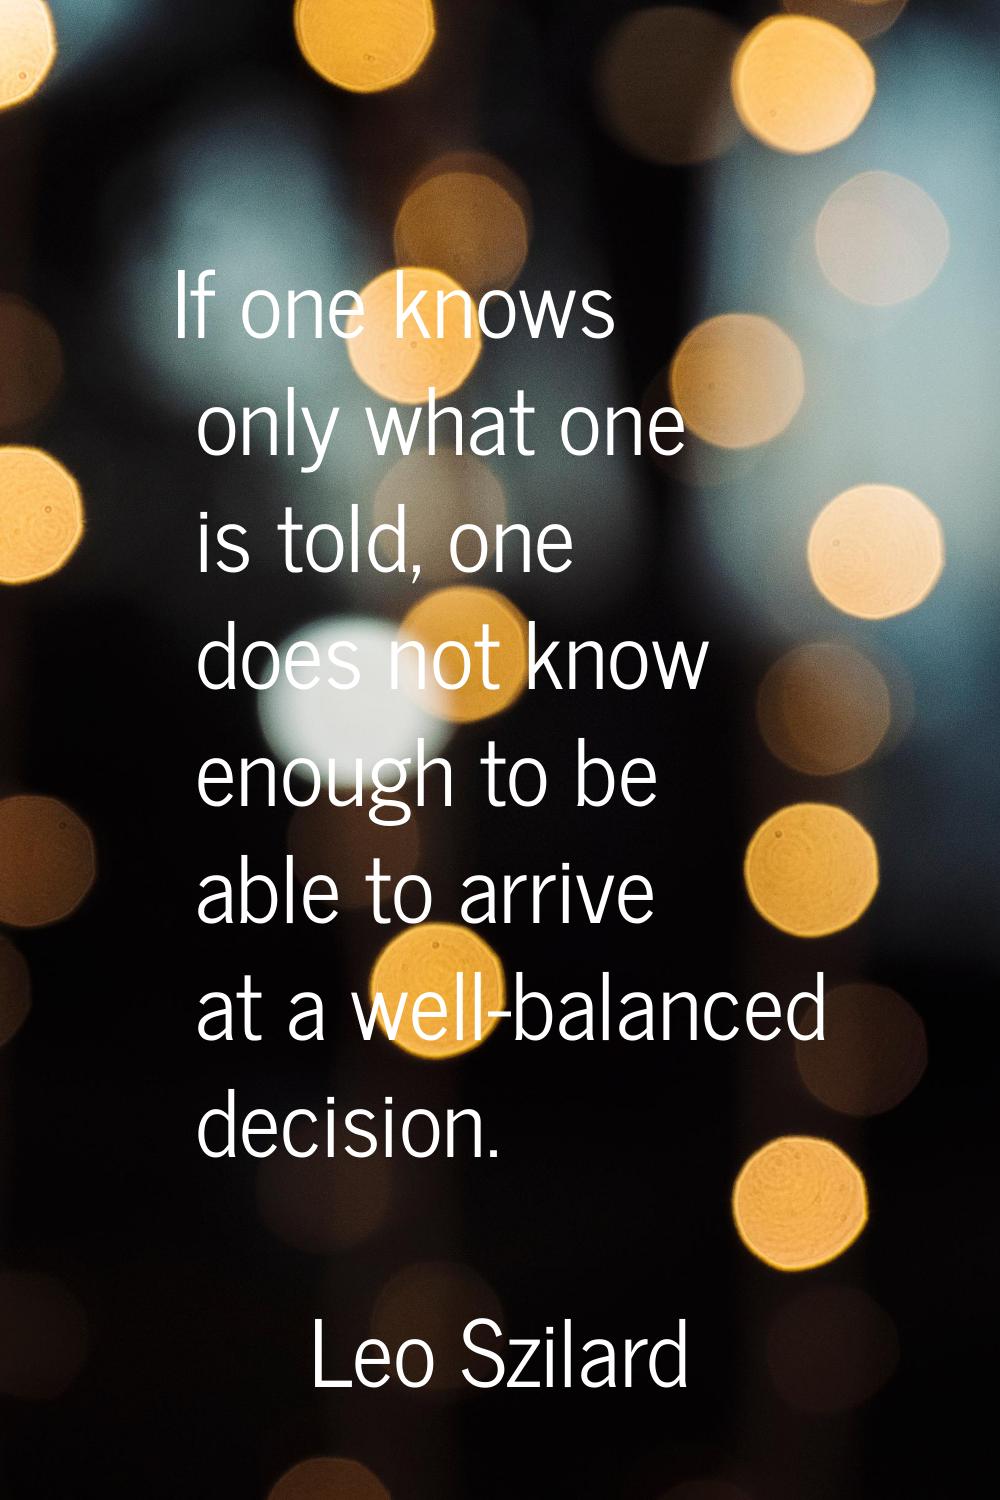 If one knows only what one is told, one does not know enough to be able to arrive at a well-balance